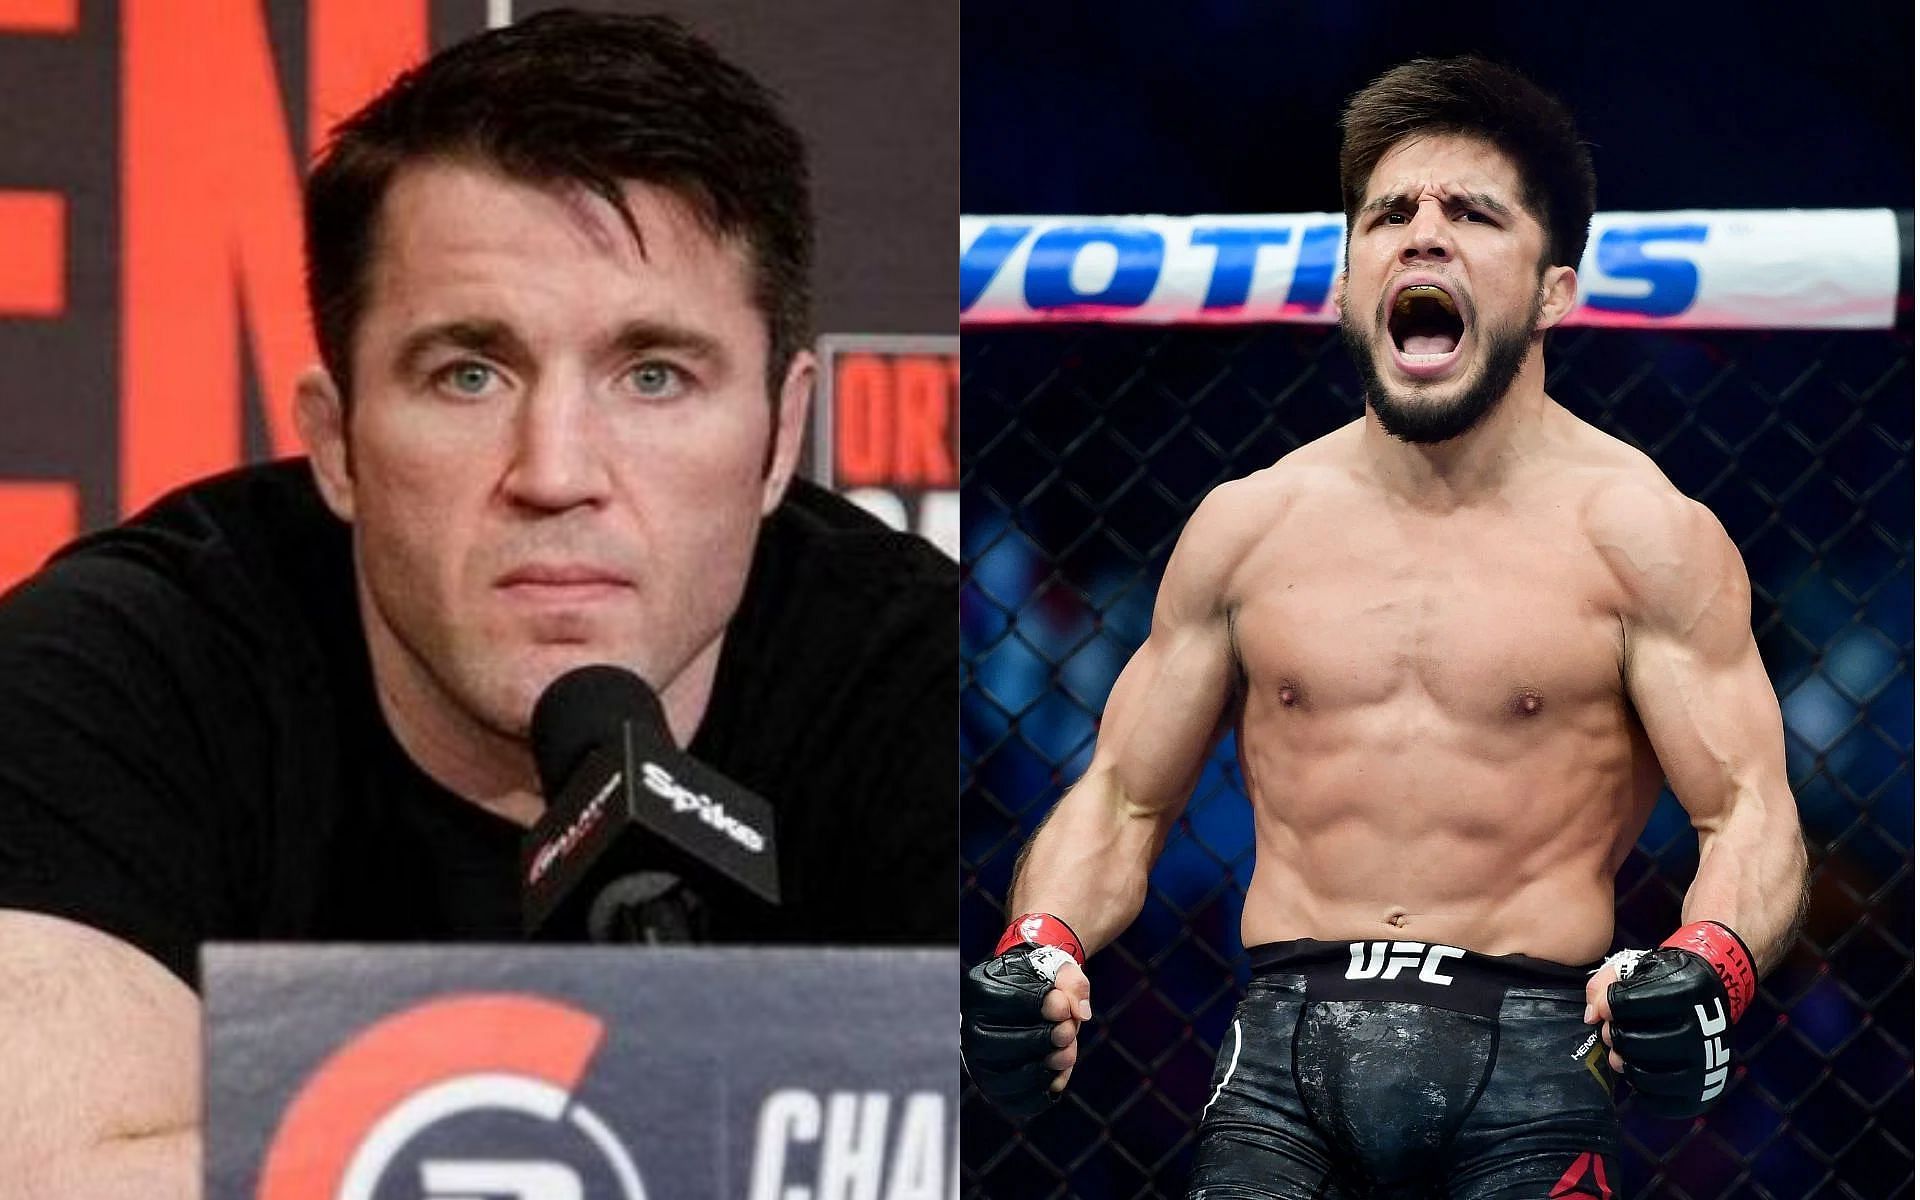 Chael Sonnen (left) and Henry Cejudo (right)